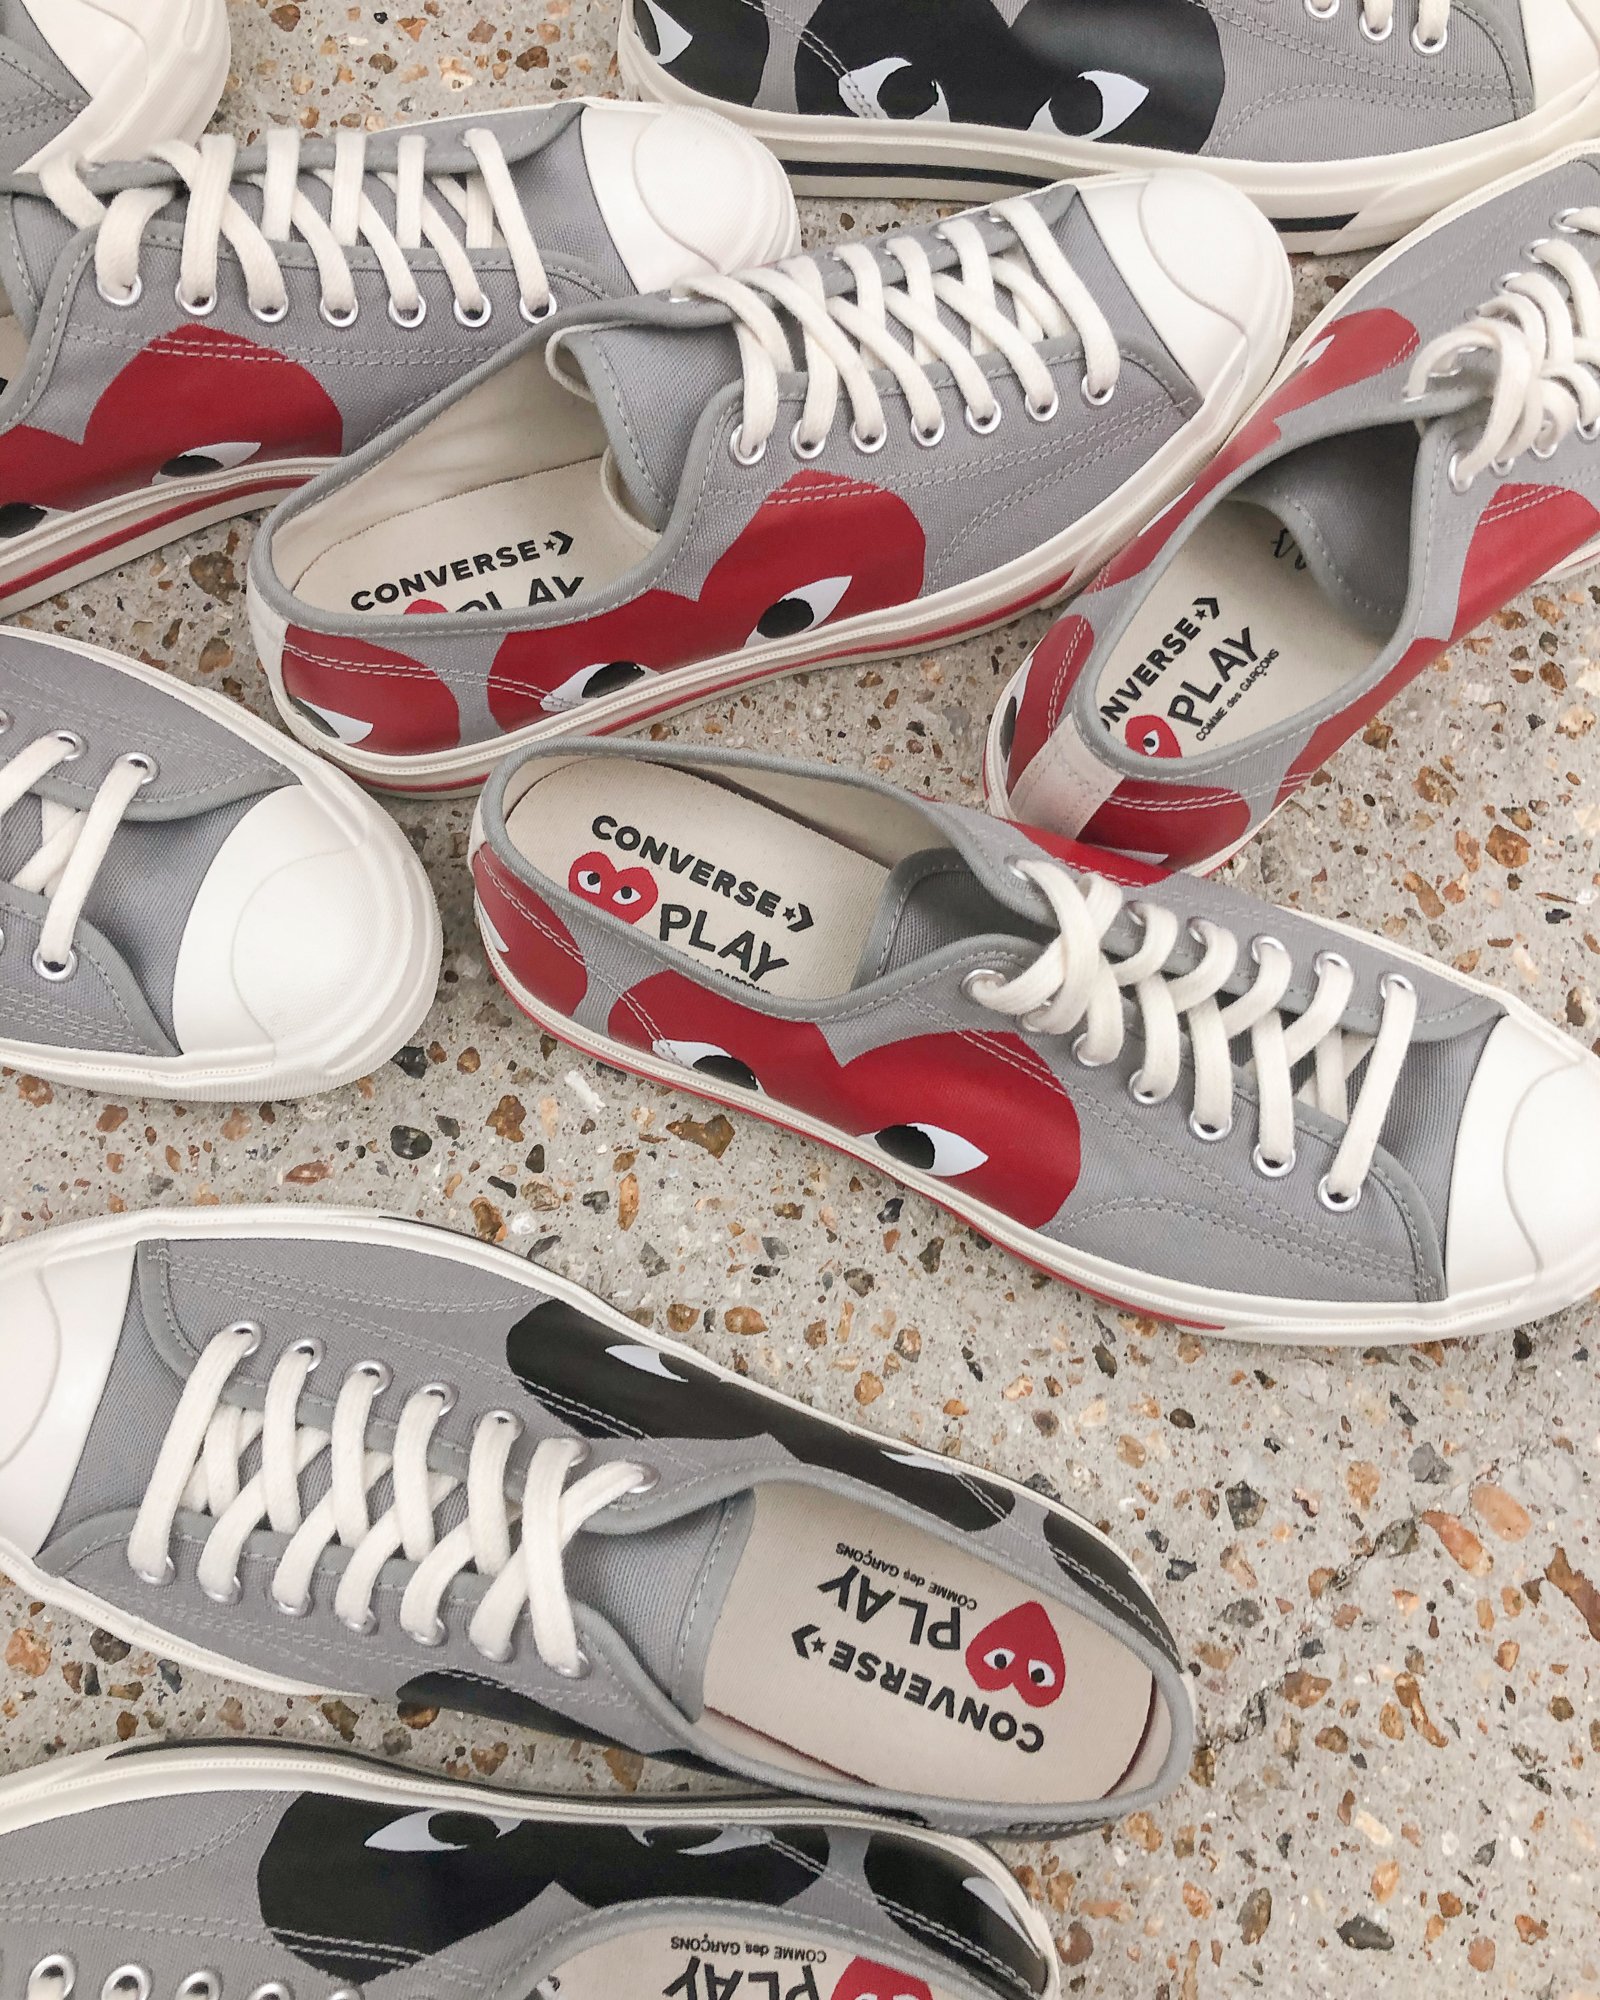 CdG PLAY x Converse Jack Purcell